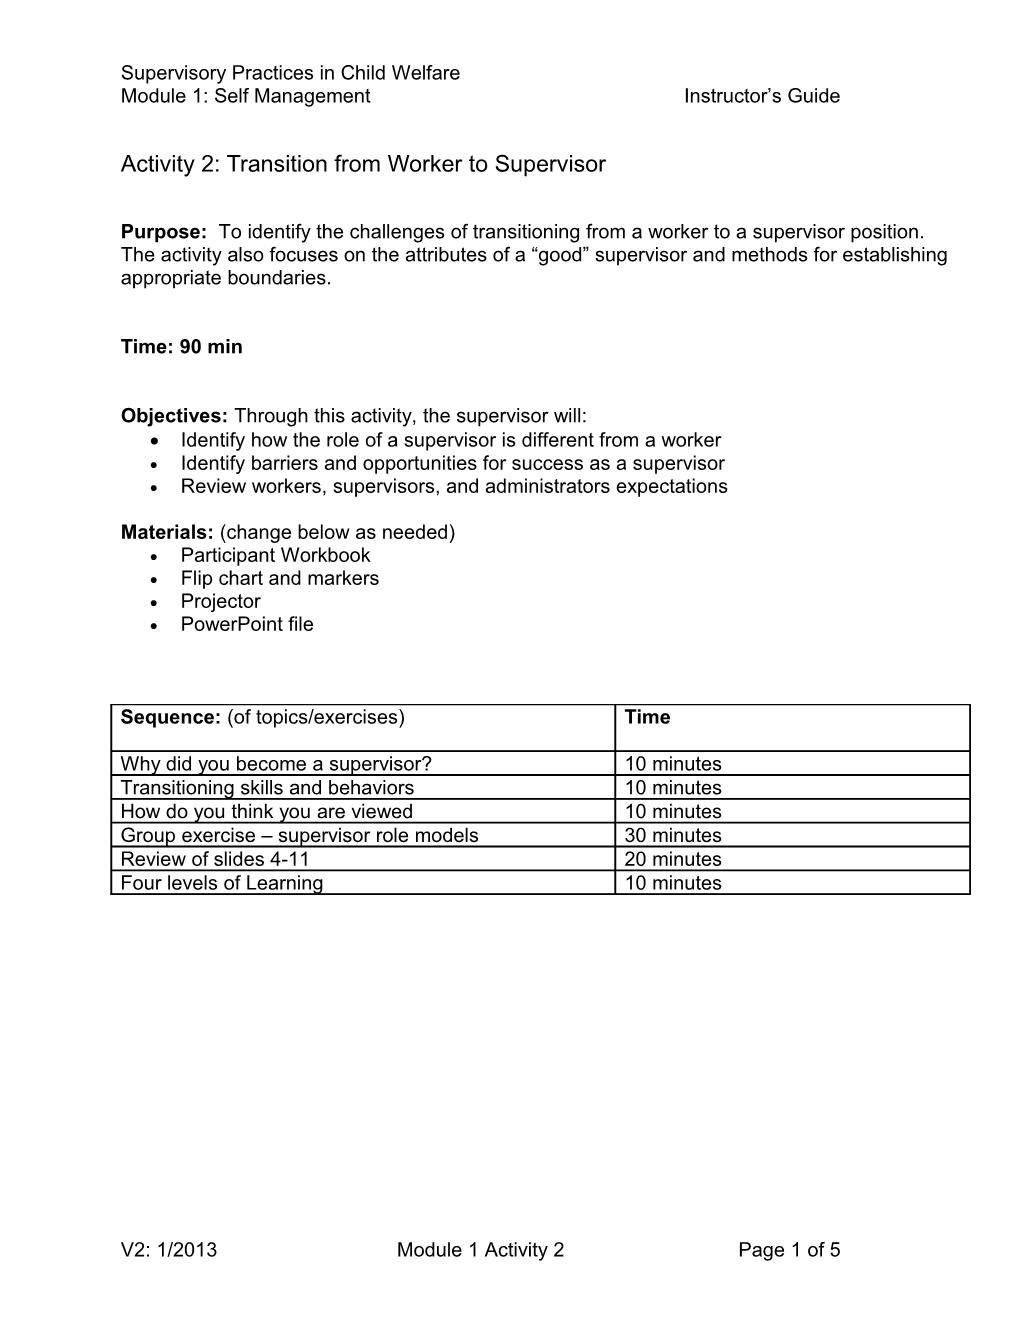 Activity 2: Transition from Worker to Supervisor